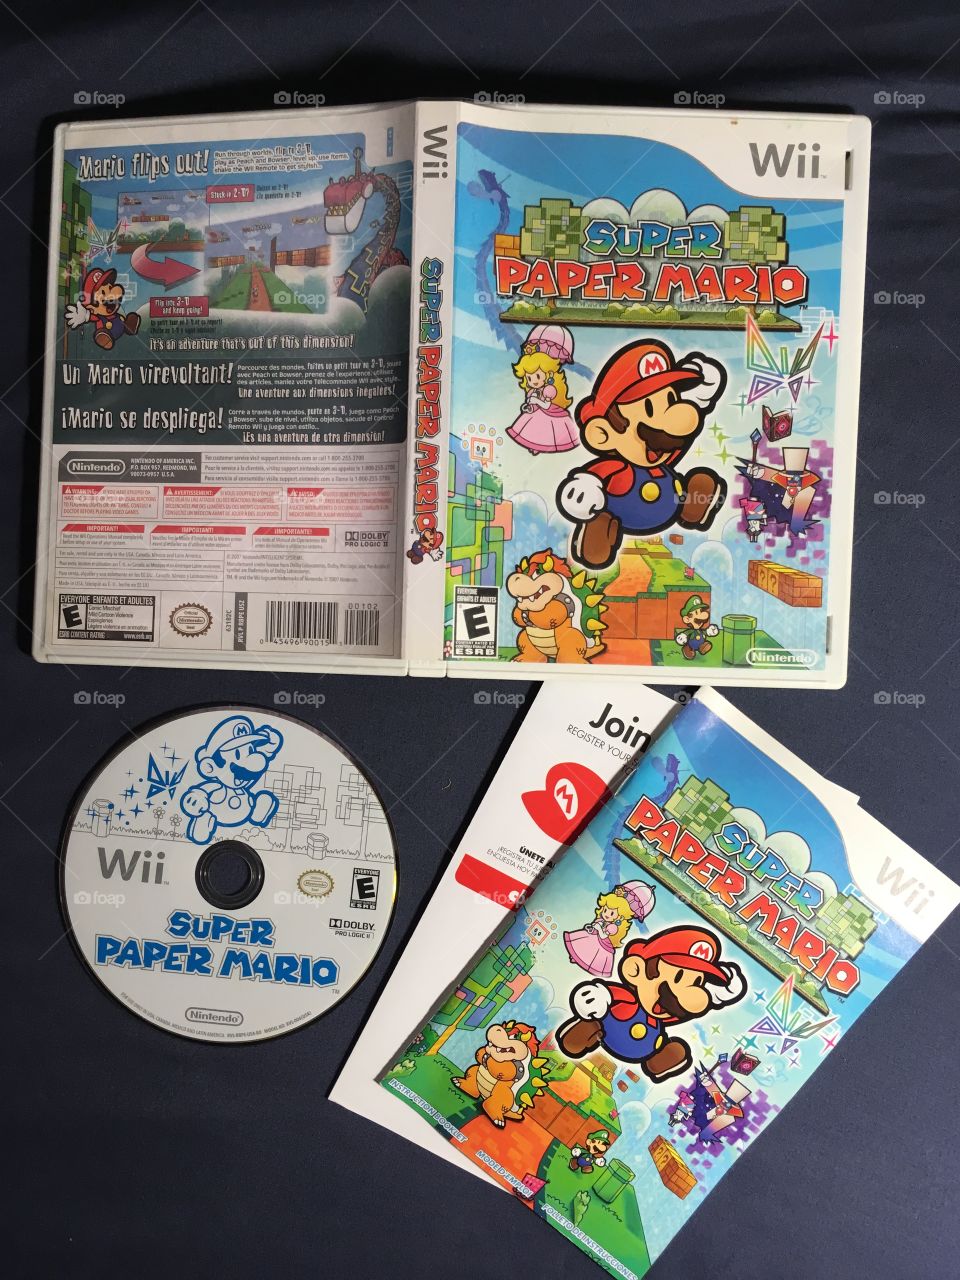 Super Paper Mario video game for the Nintendo Wii - Complete - released 2007